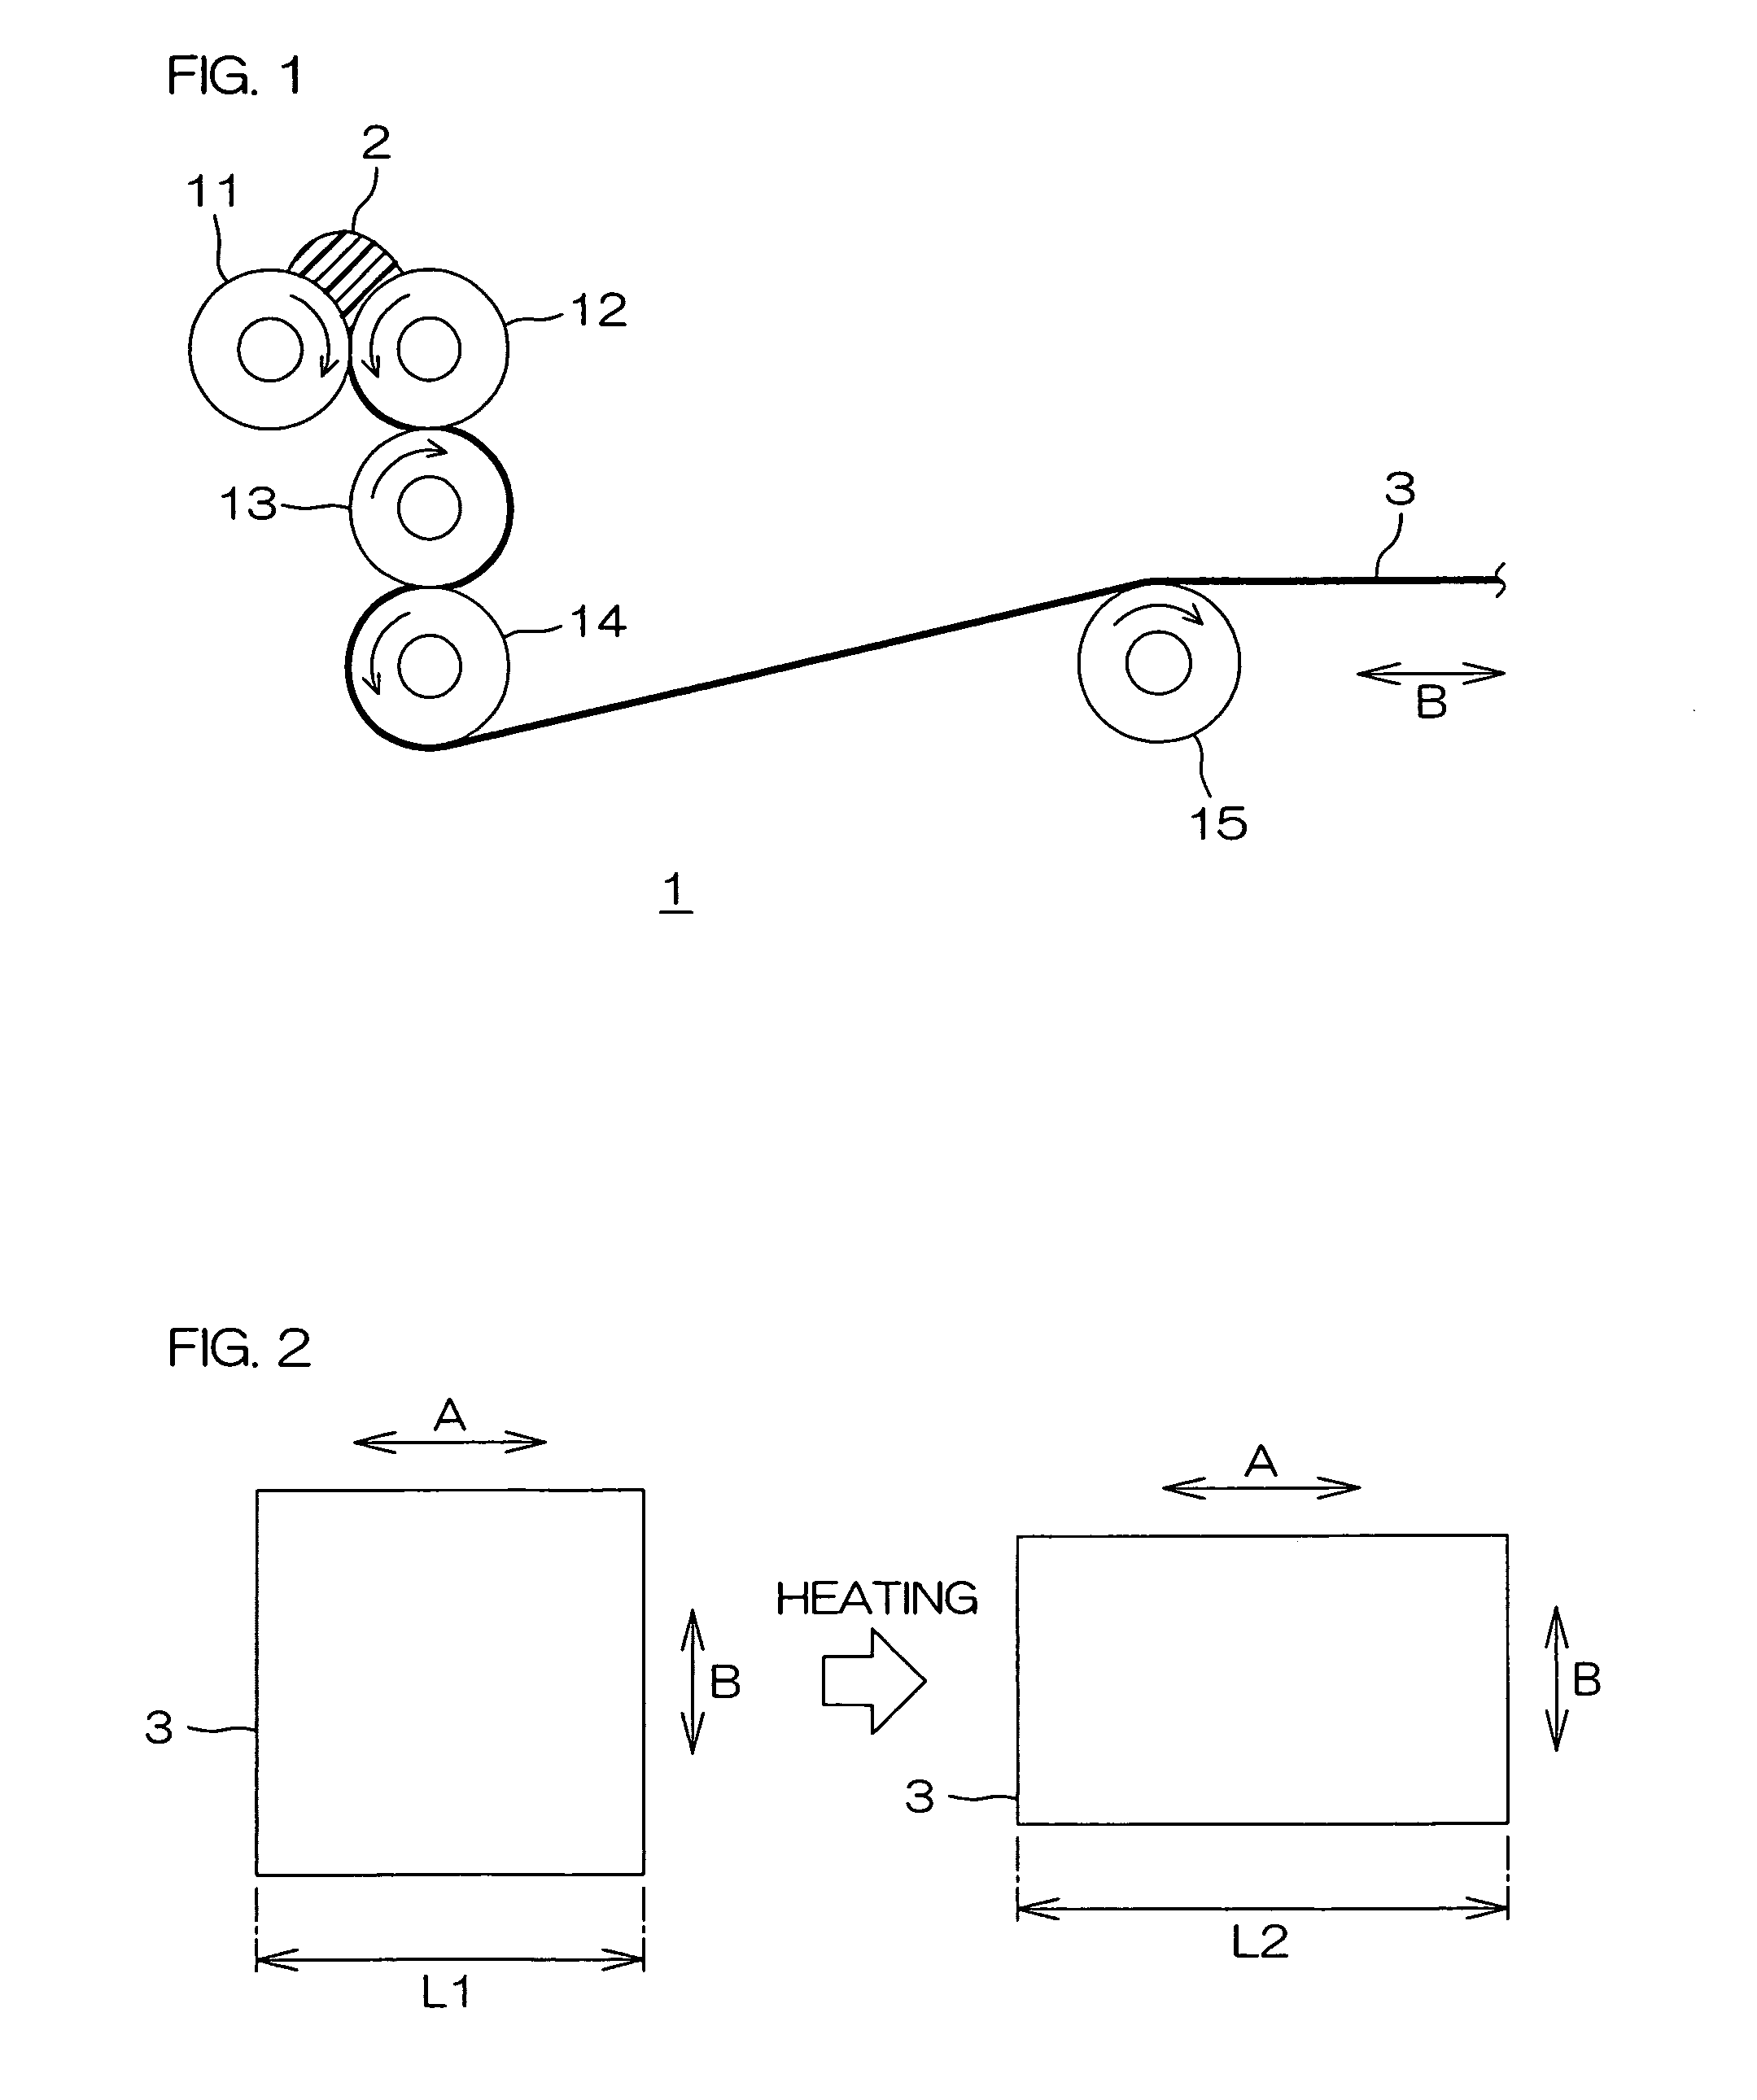 Heat-foamable sheet, method for manufacturing the same, foaming filler member, and method for filling inner space of hollow member